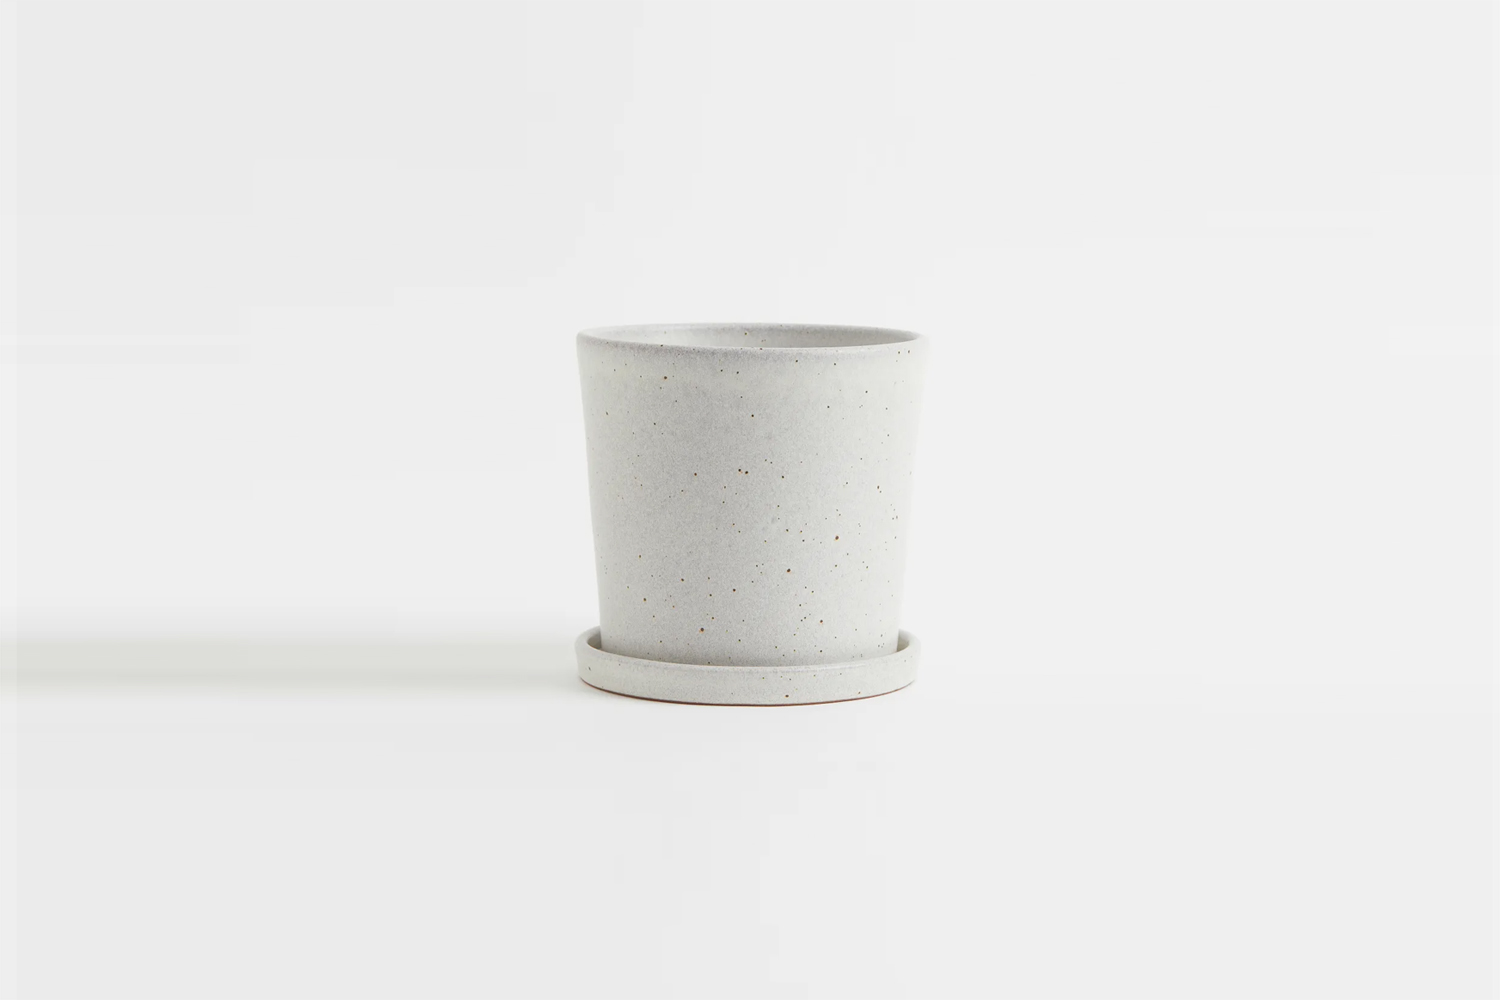 the white speckled plant pot and saucer is \$\24.99 at h&m. 26